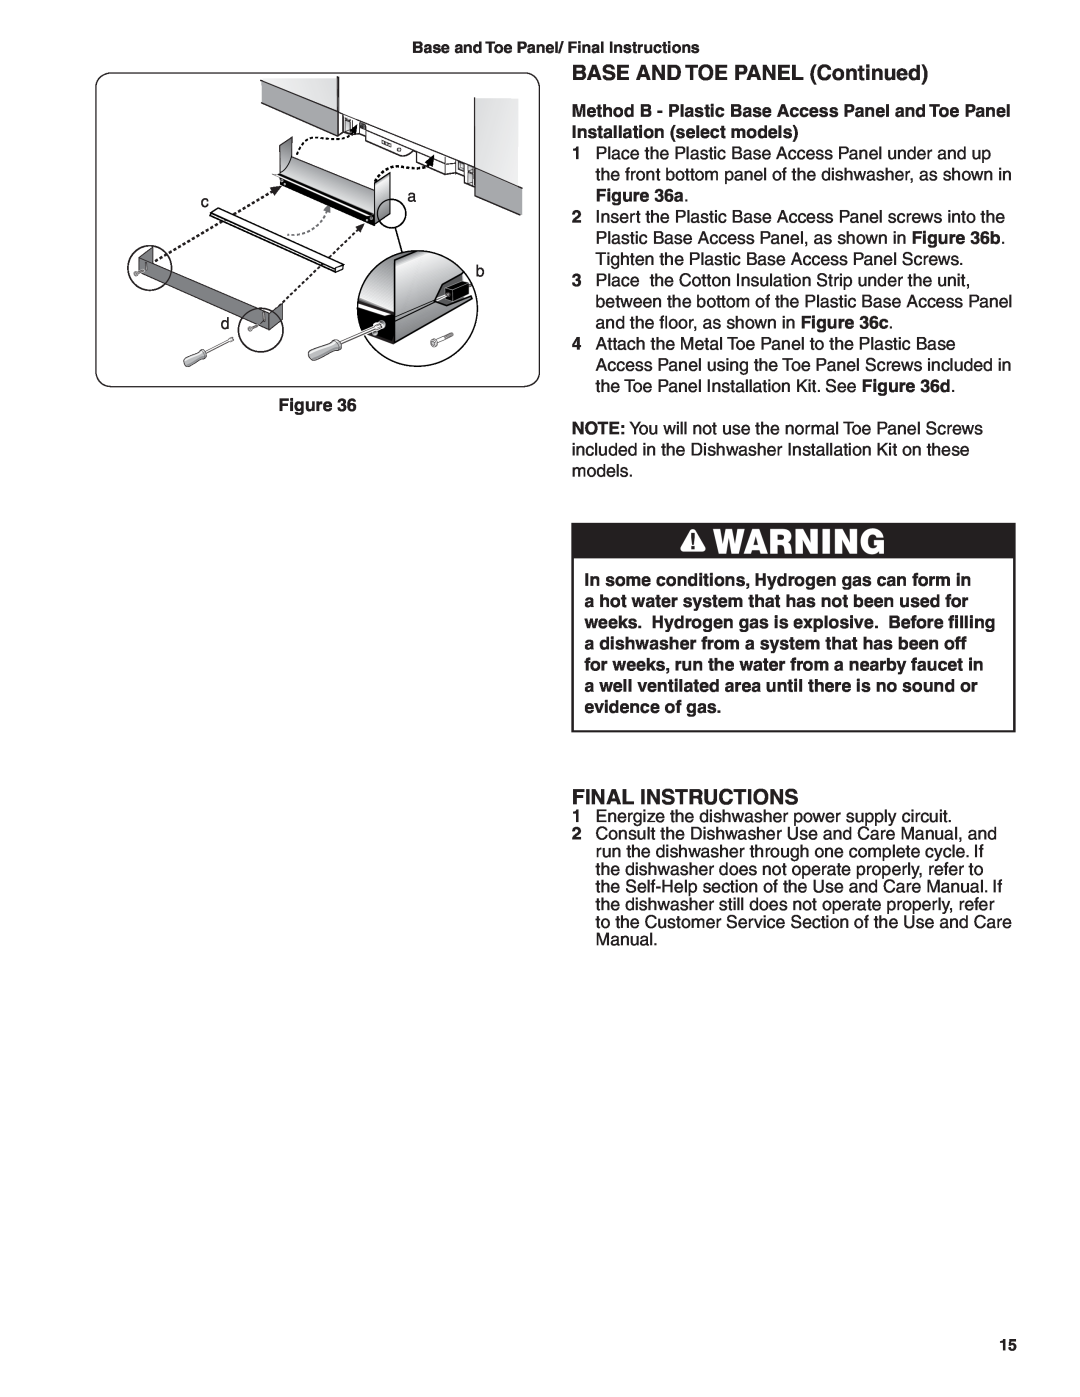 Bosch Appliances BSH Dishwasher important safety instructions BASE AND TOE PANEL Continued, Final Instructions 